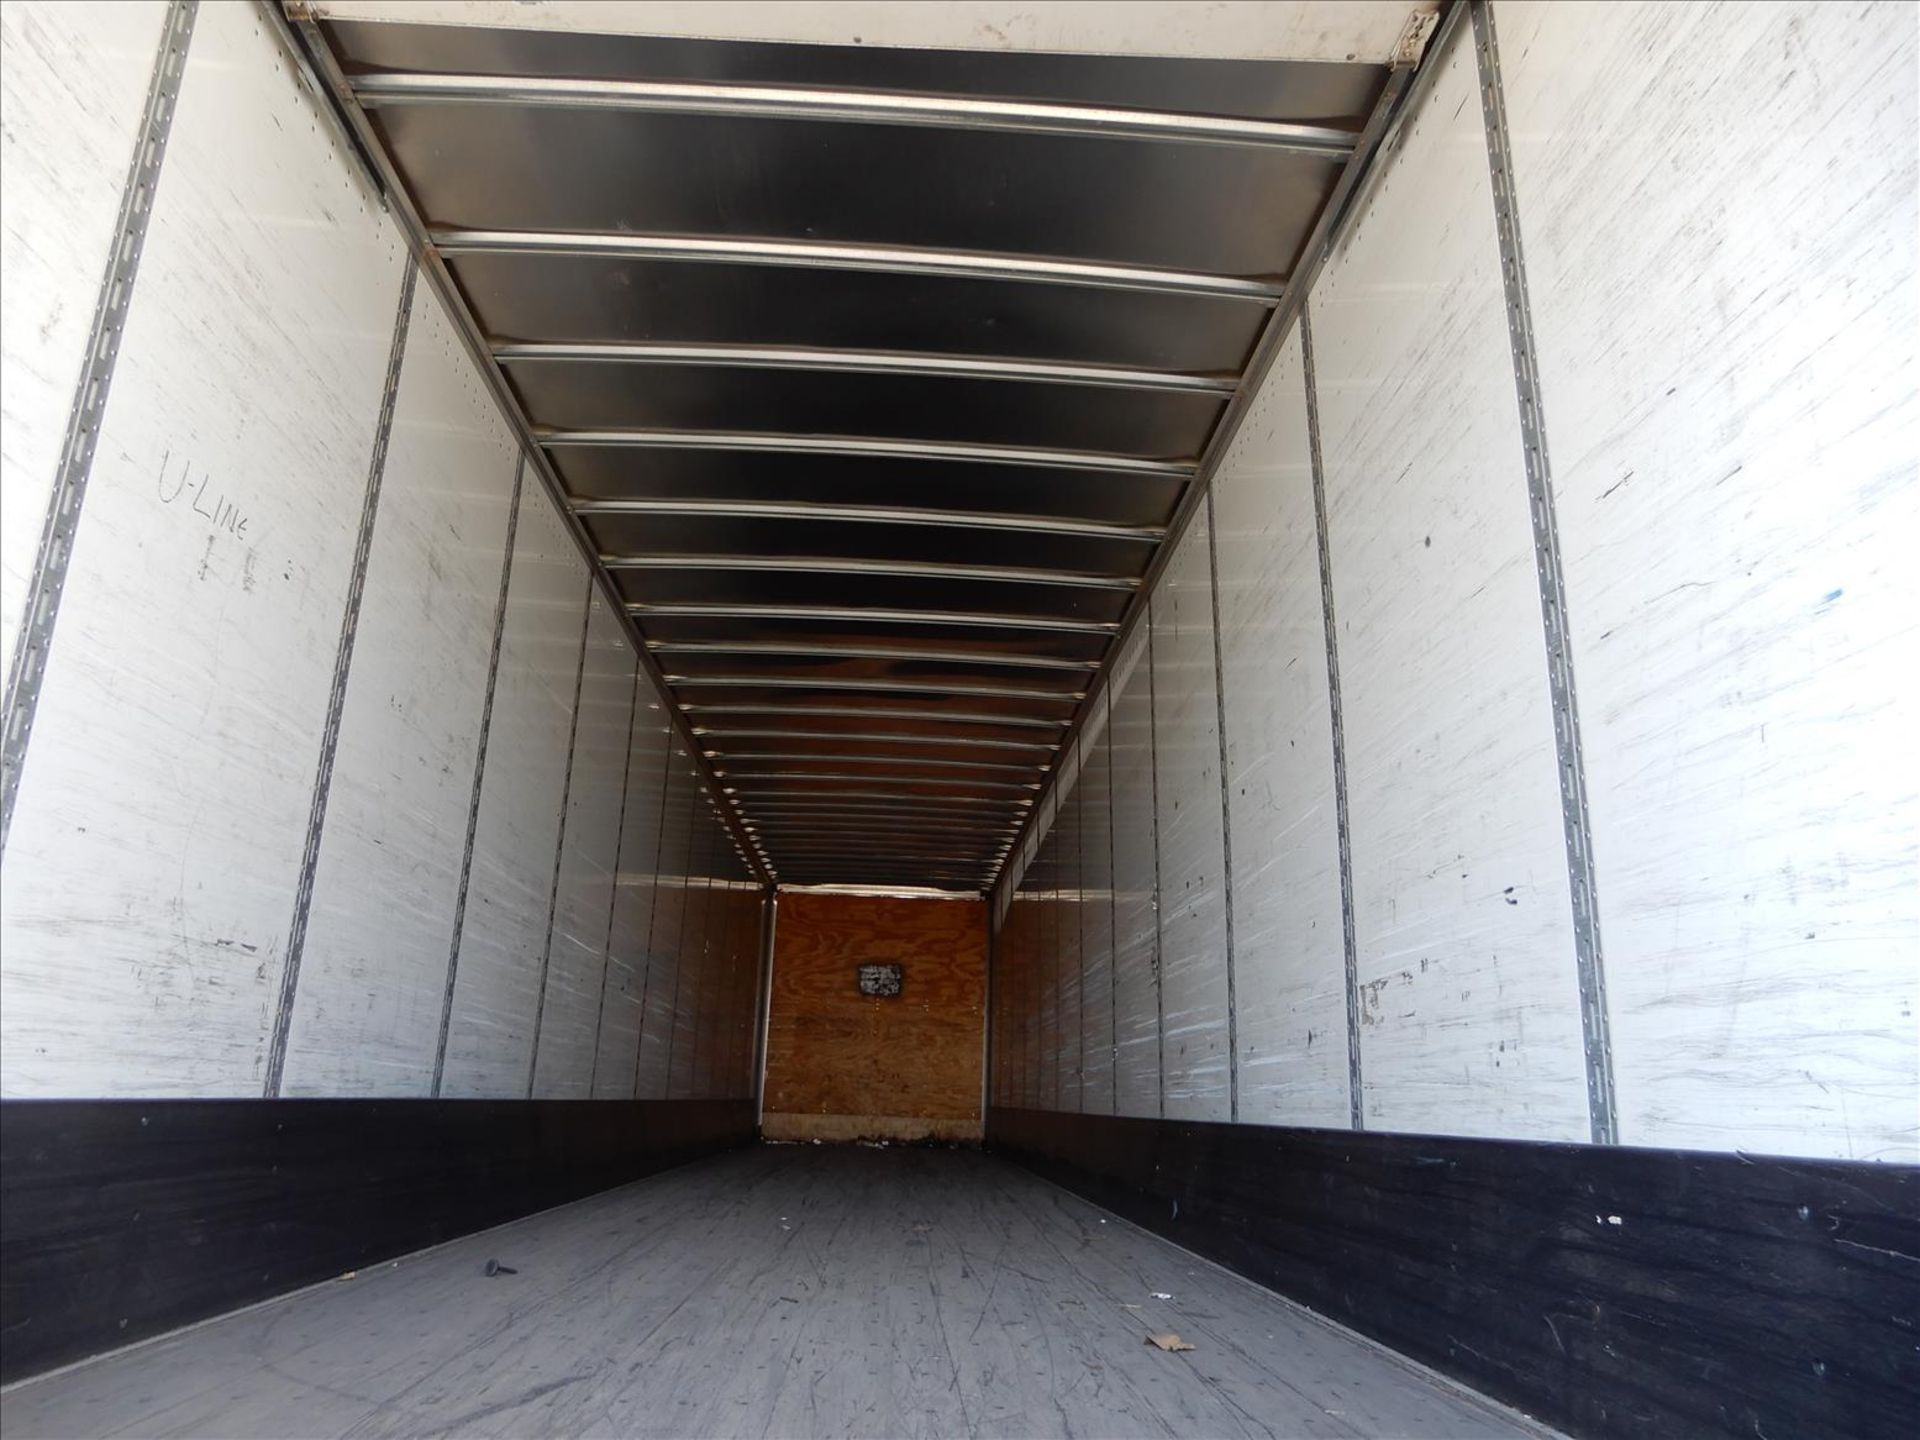 2012 Vanguard Trailer - Located in Indianapolis, IN - Image 24 of 29